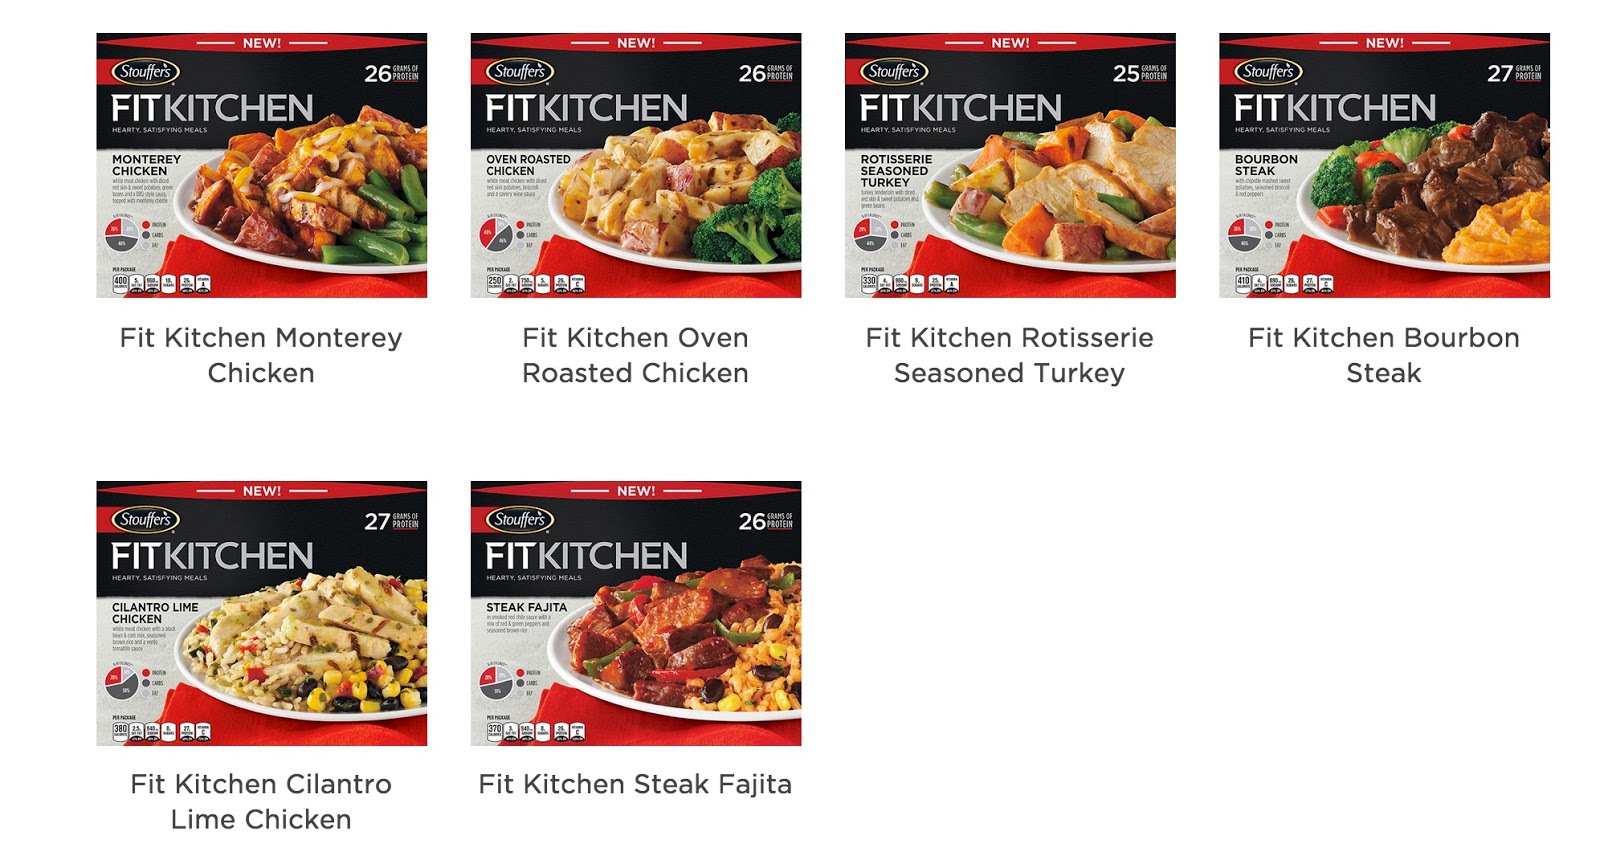 DADaPalooza Stouffers Fitkitchen My Partner In Eating Better